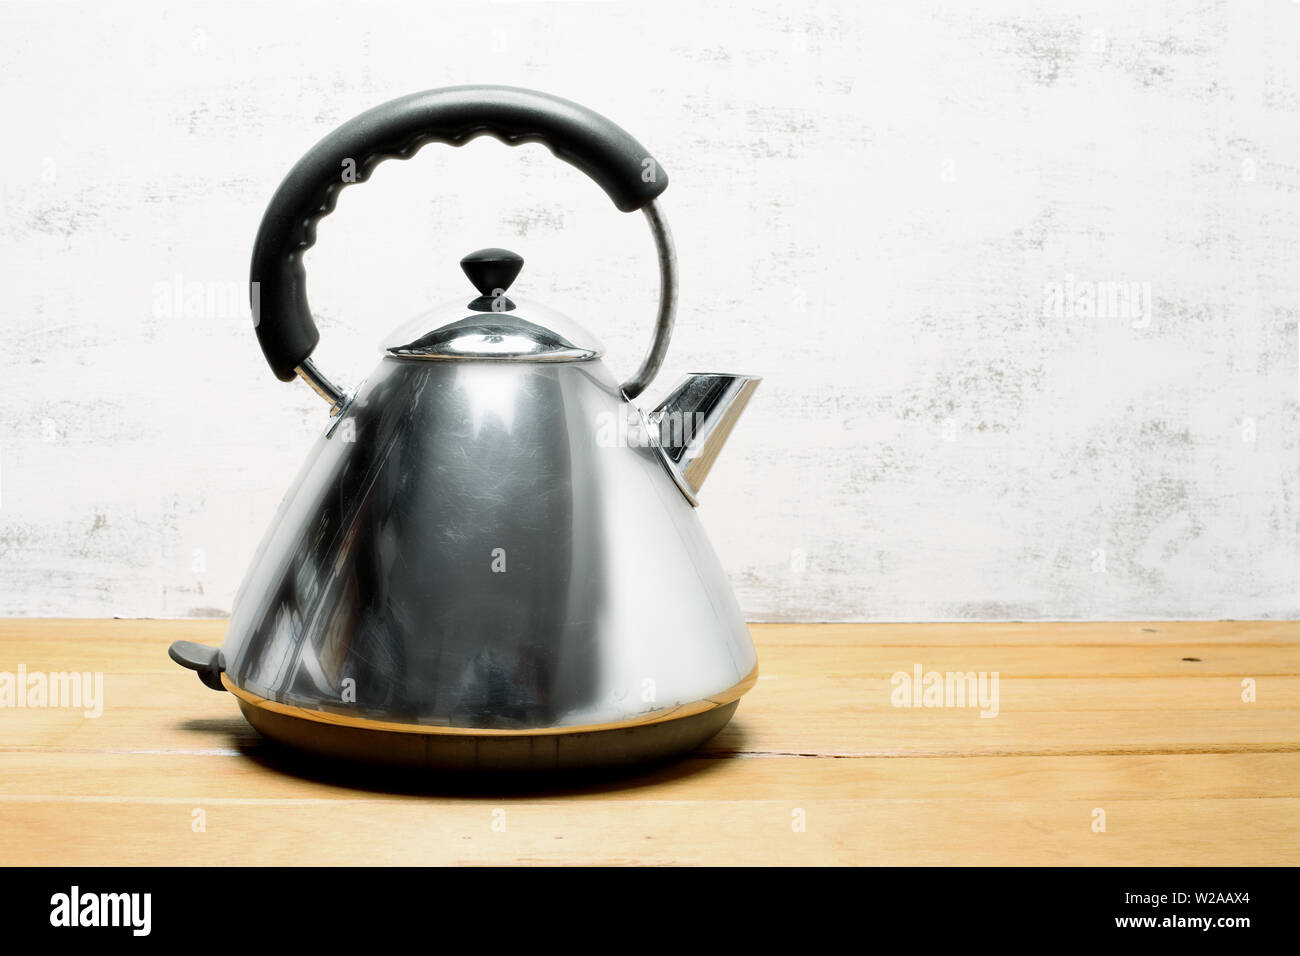 https://c8.alamy.com/comp/W2AAX4/retro-electric-kettle-on-wooden-background-W2AAX4.jpg